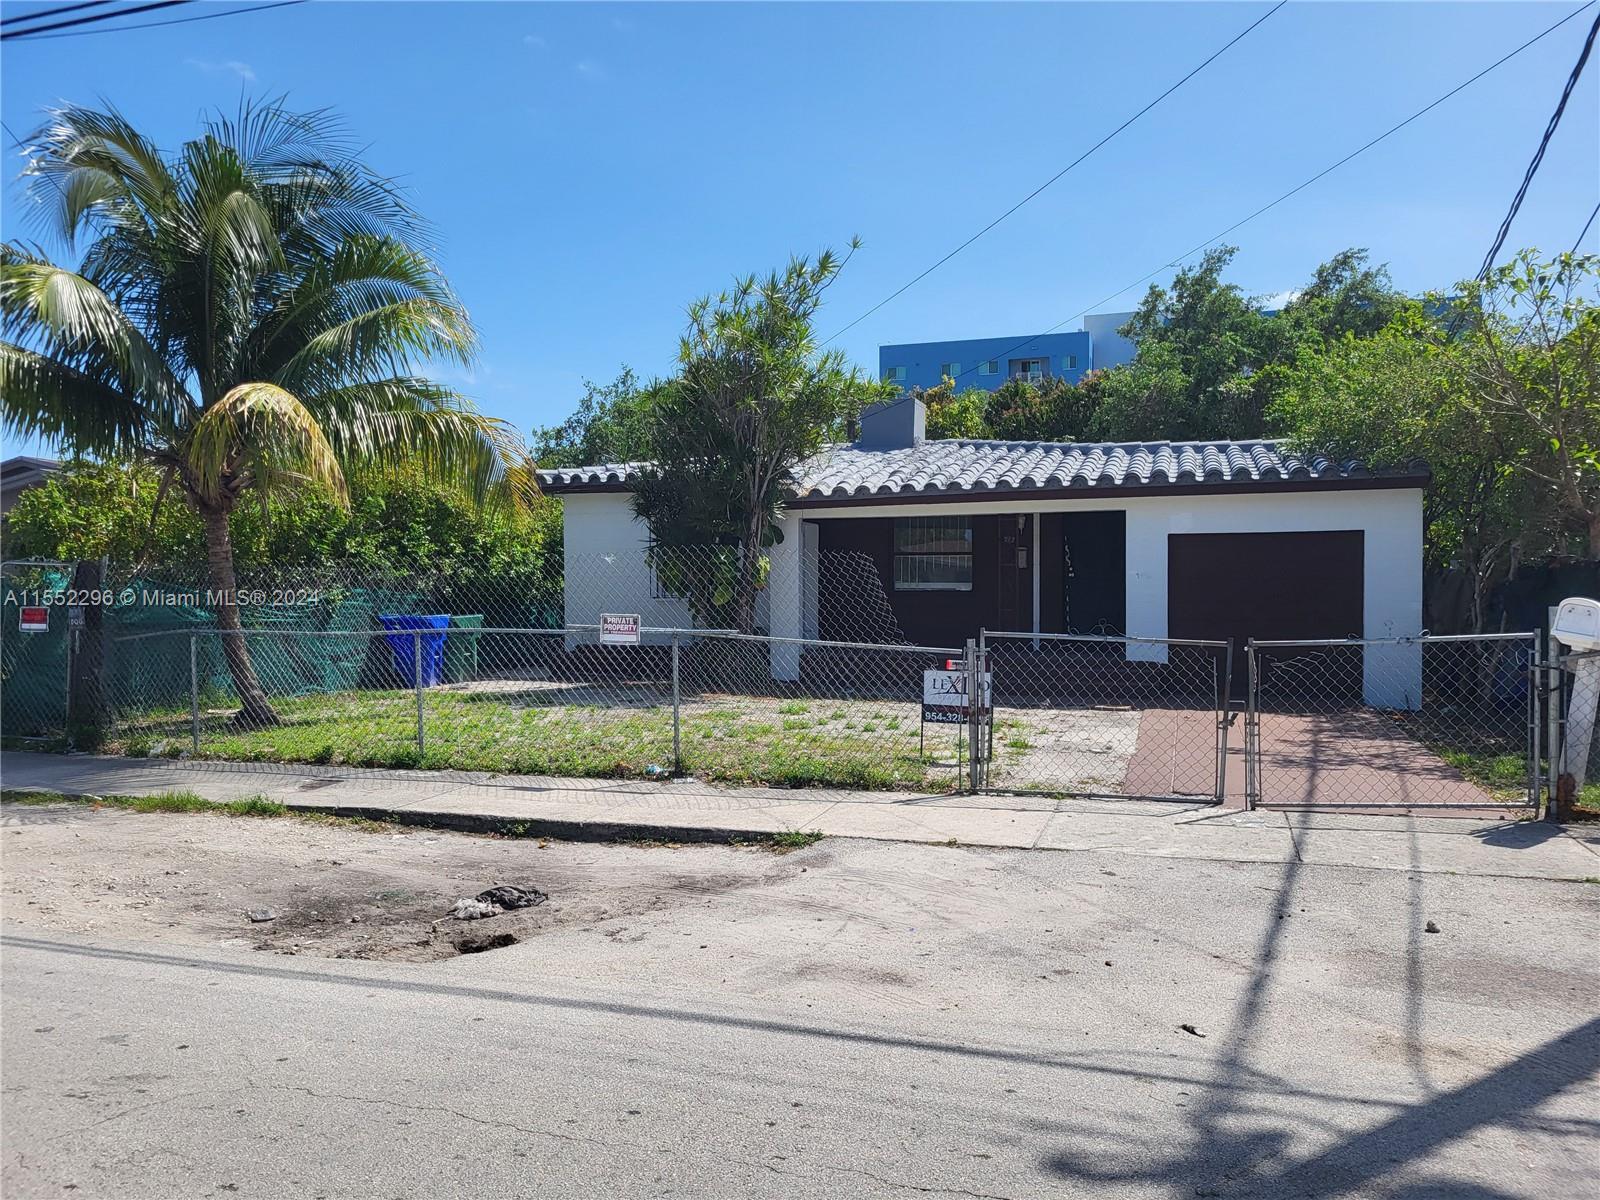 Photo of 742 NW 70th St in Miami, FL